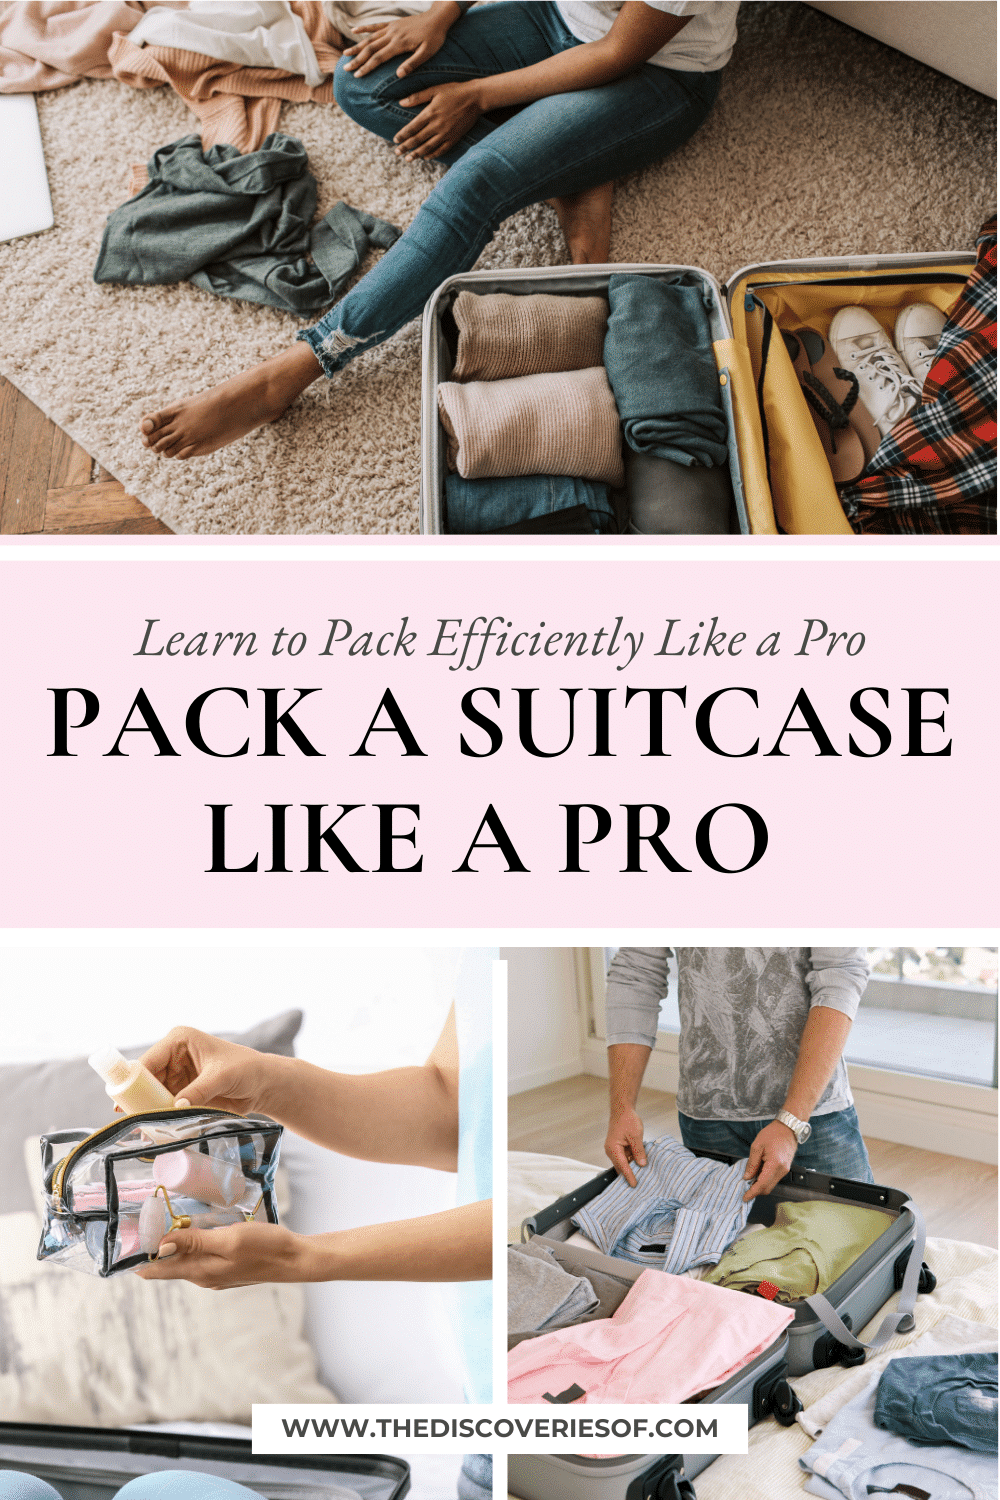 Pack a Suitcase Like a Pro 